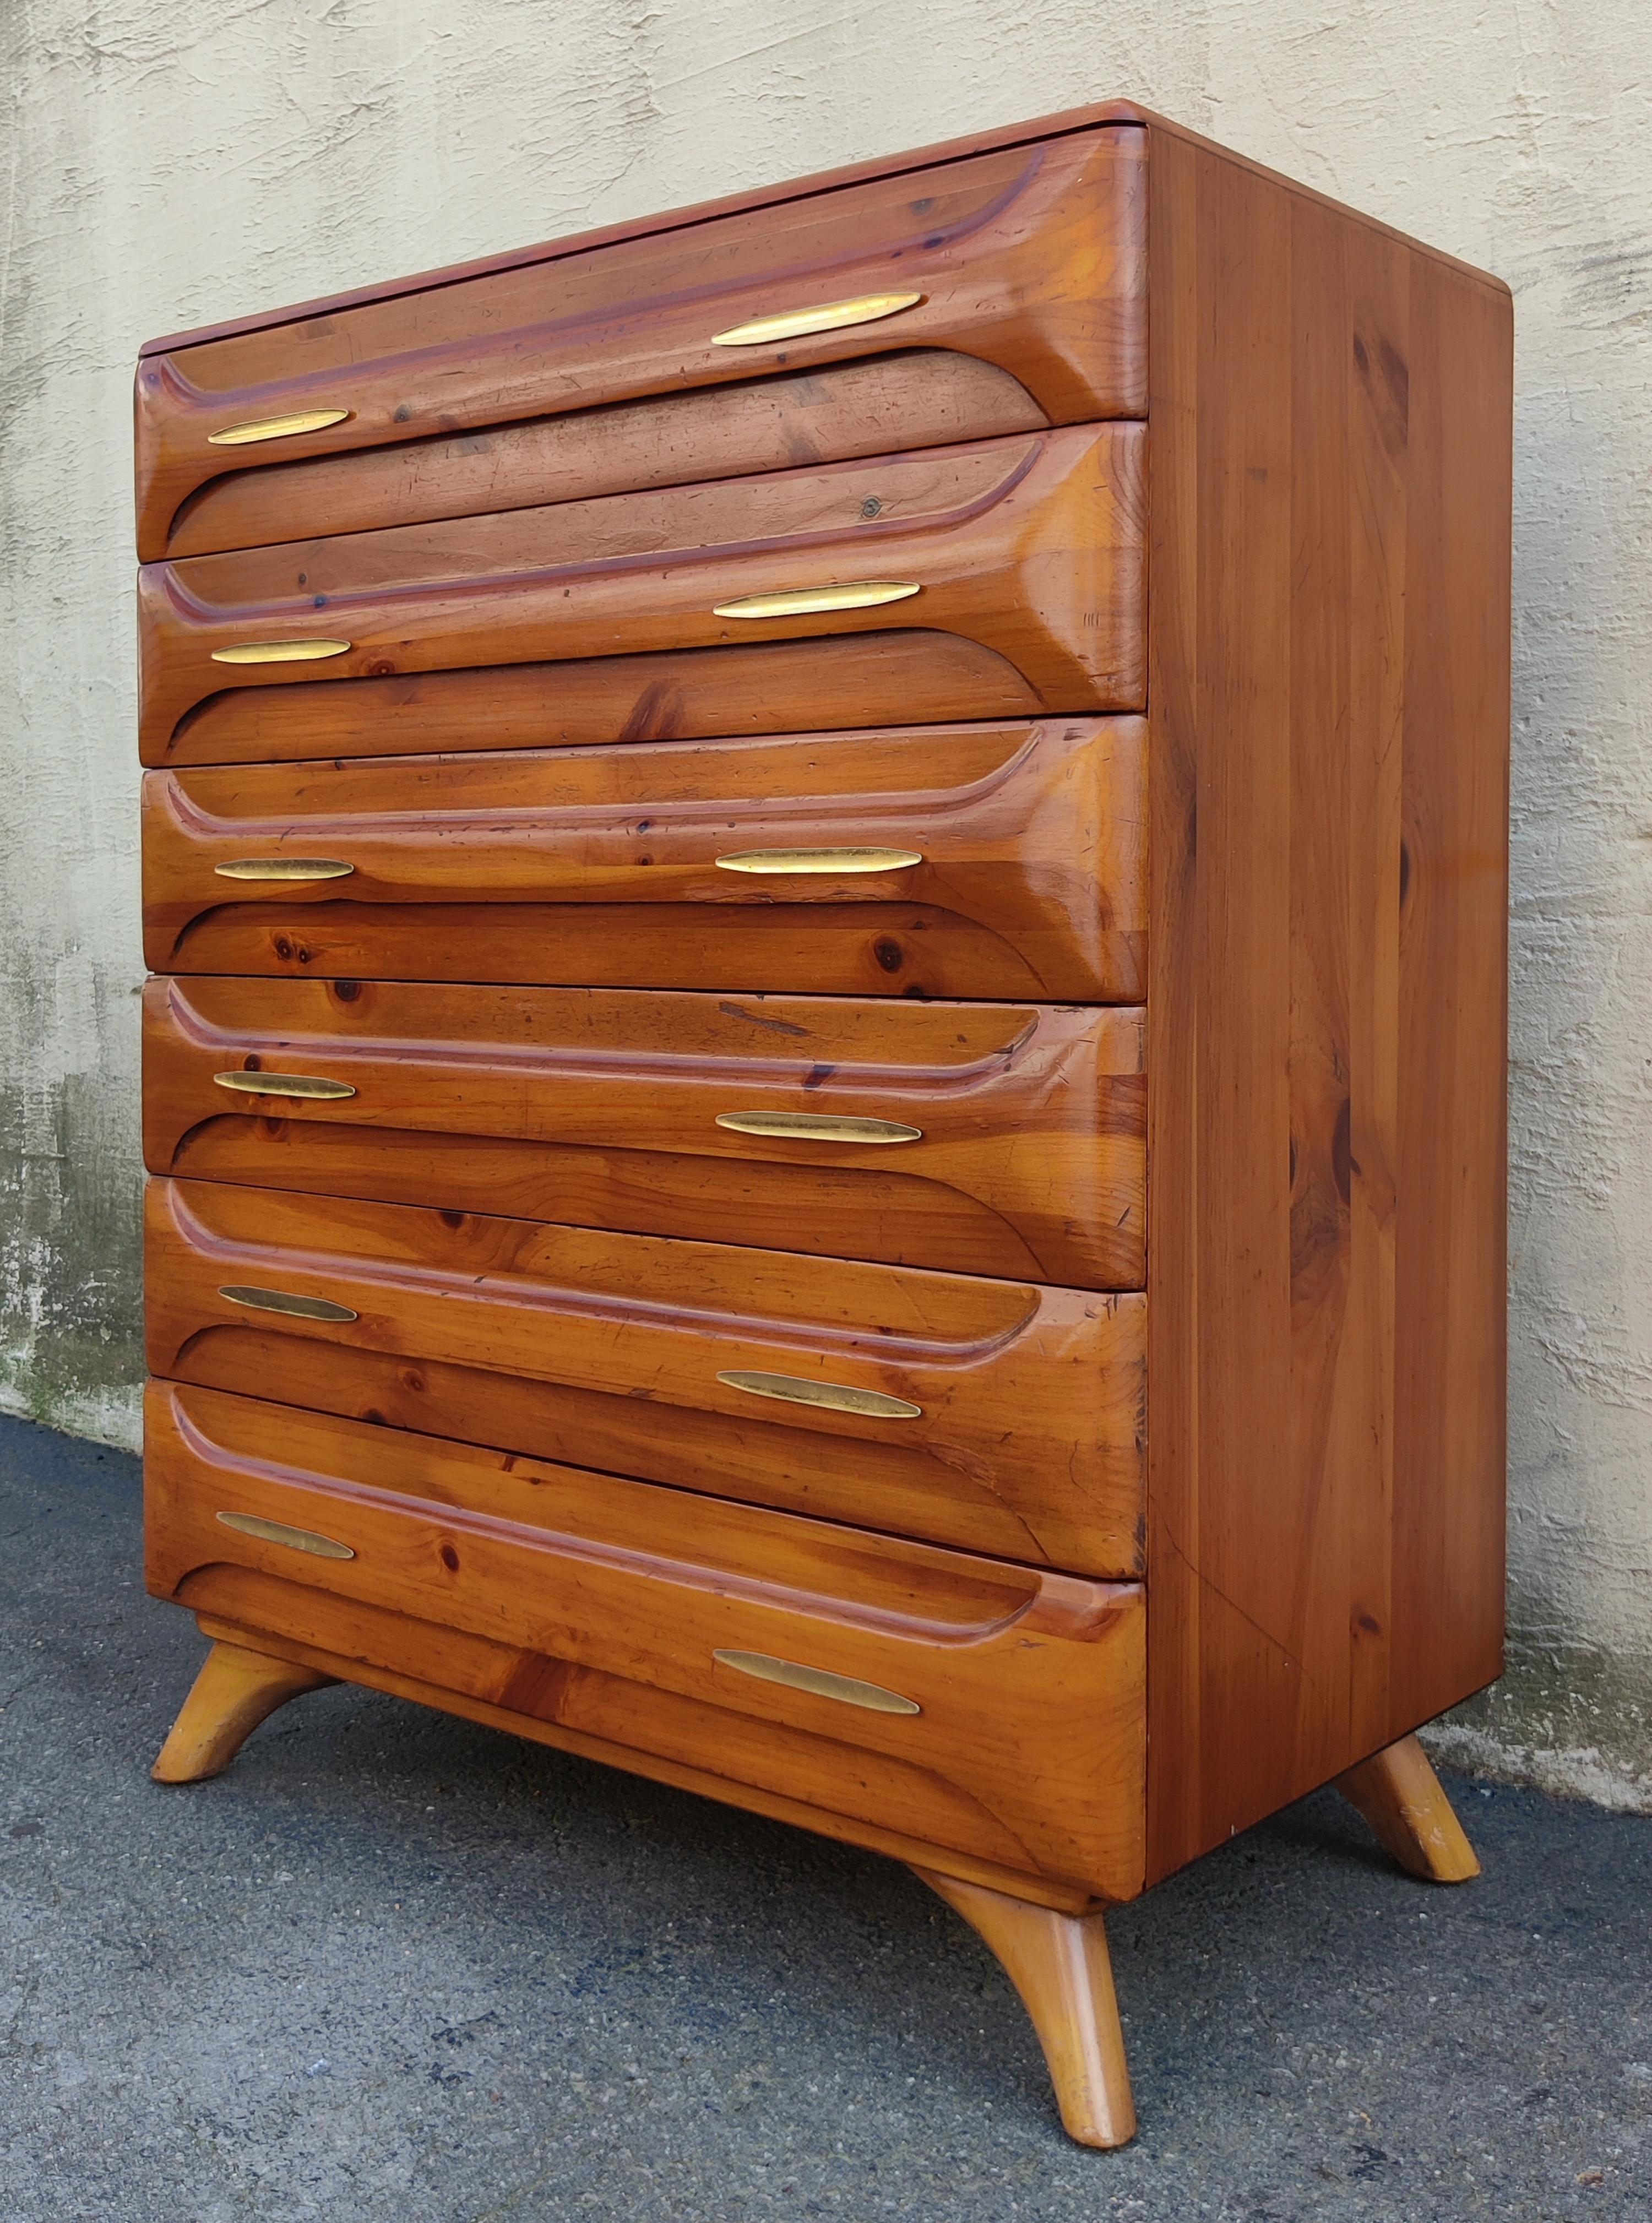 Franklin Shockey Sculptured Pine 6 Drawer Tall Dresser Mid-Century Modern 1970s In Good Condition For Sale In Philadelphia, PA